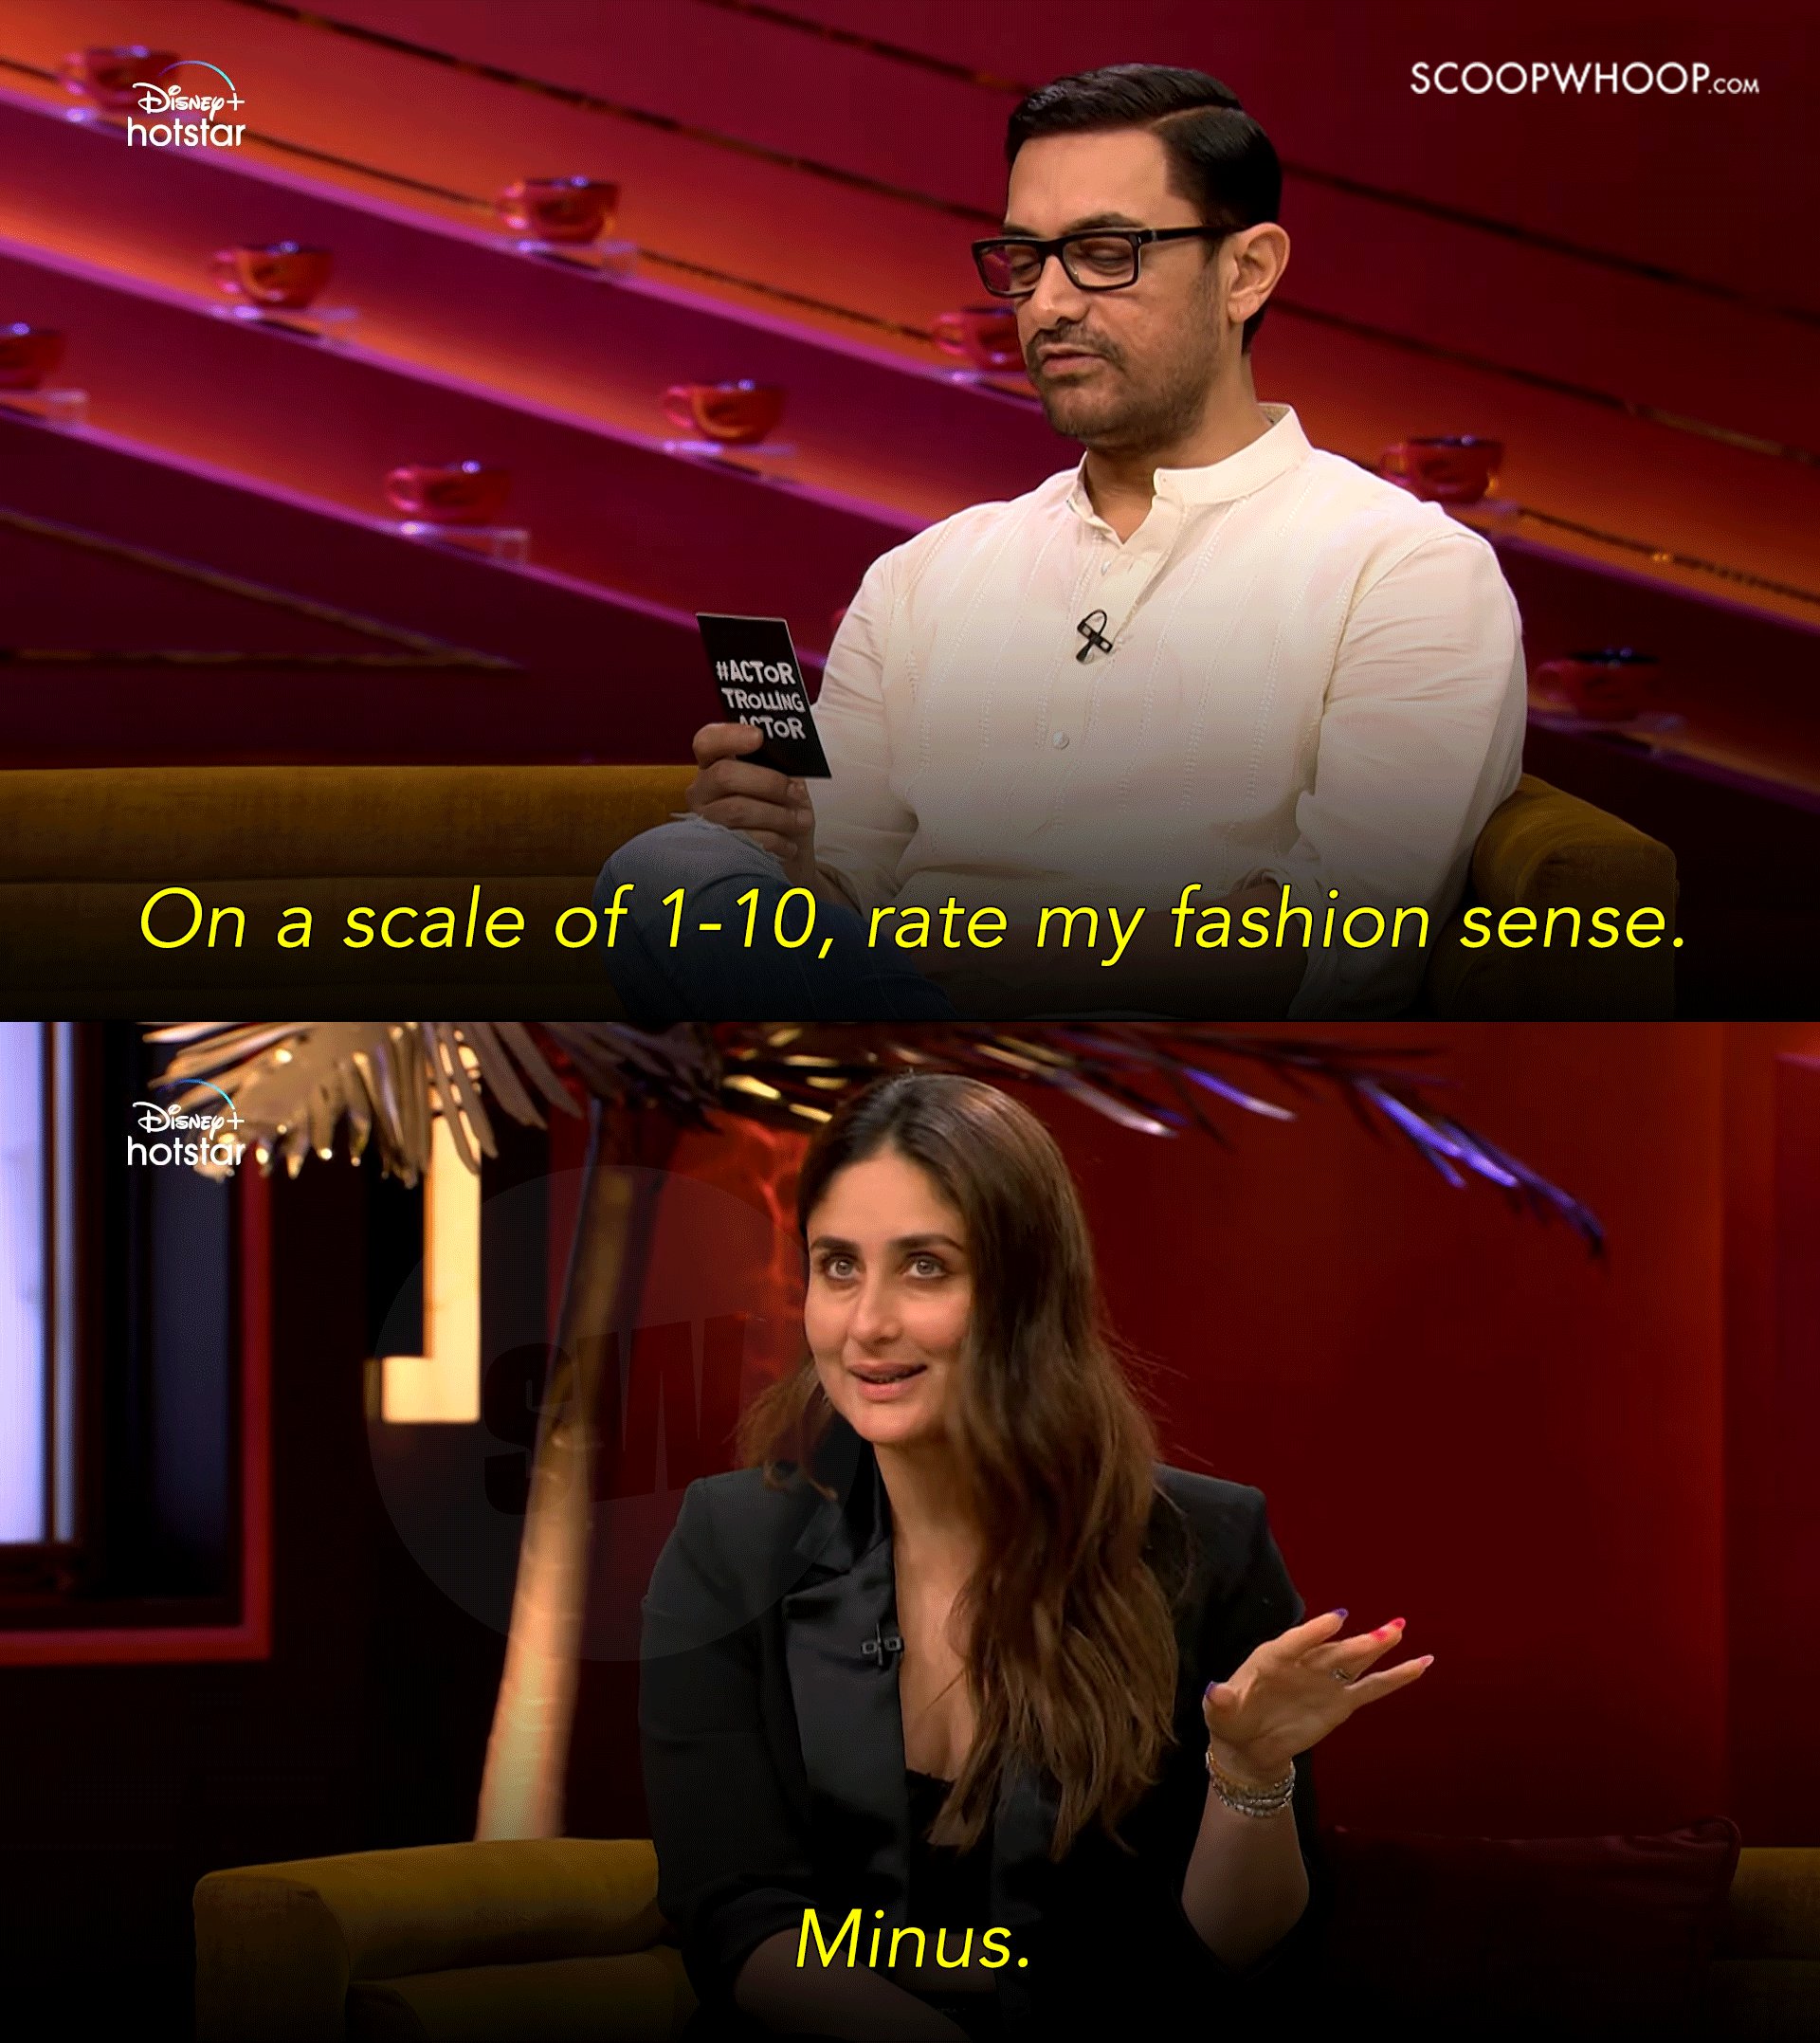 Koffee With Karan 7: BRB, Still Laughing Over Aamir Khan's One-Liners